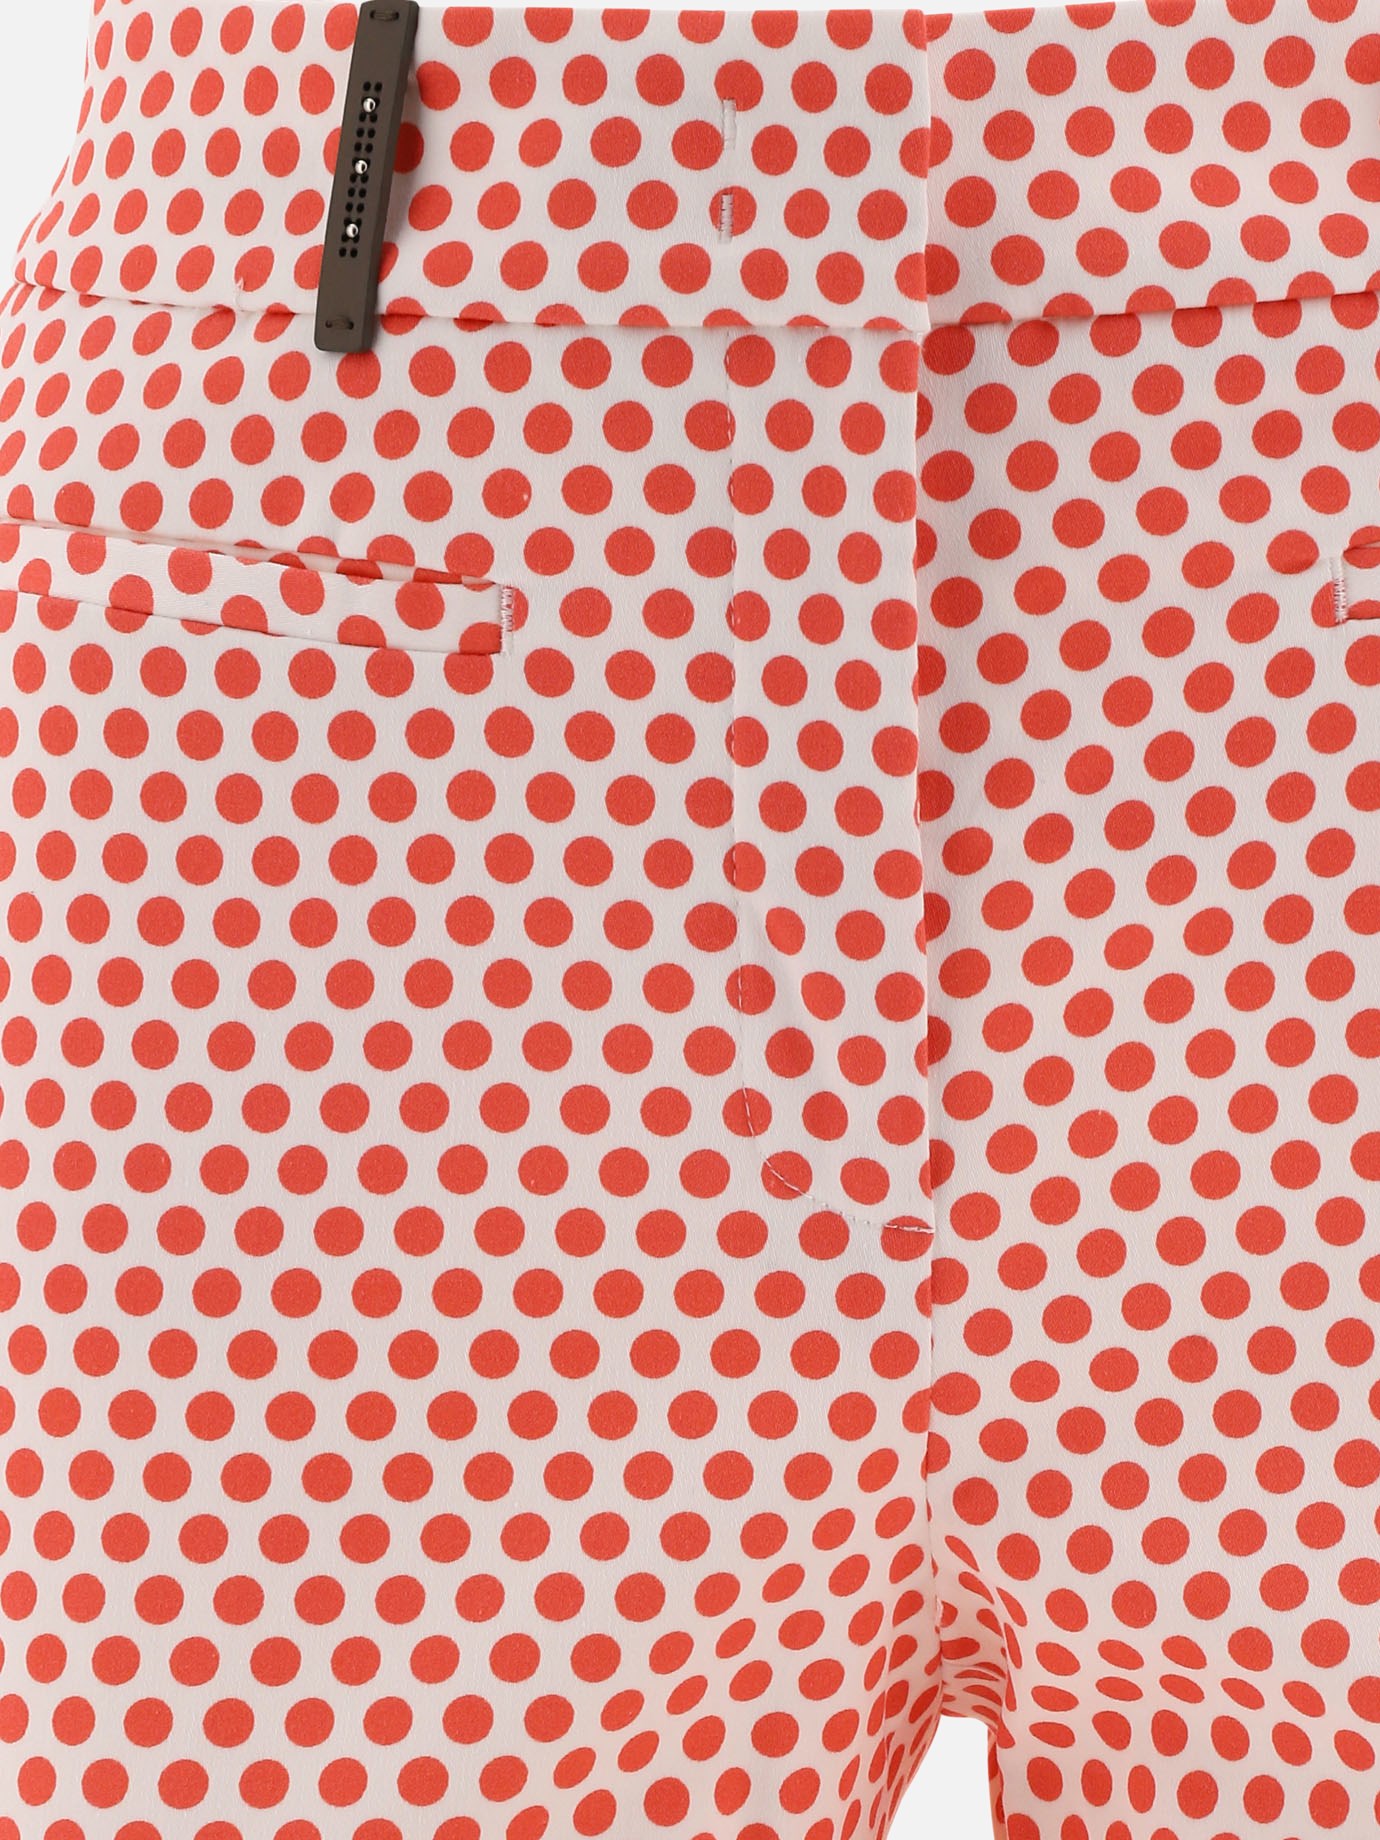  Sign  polka dot trousers by Peserico